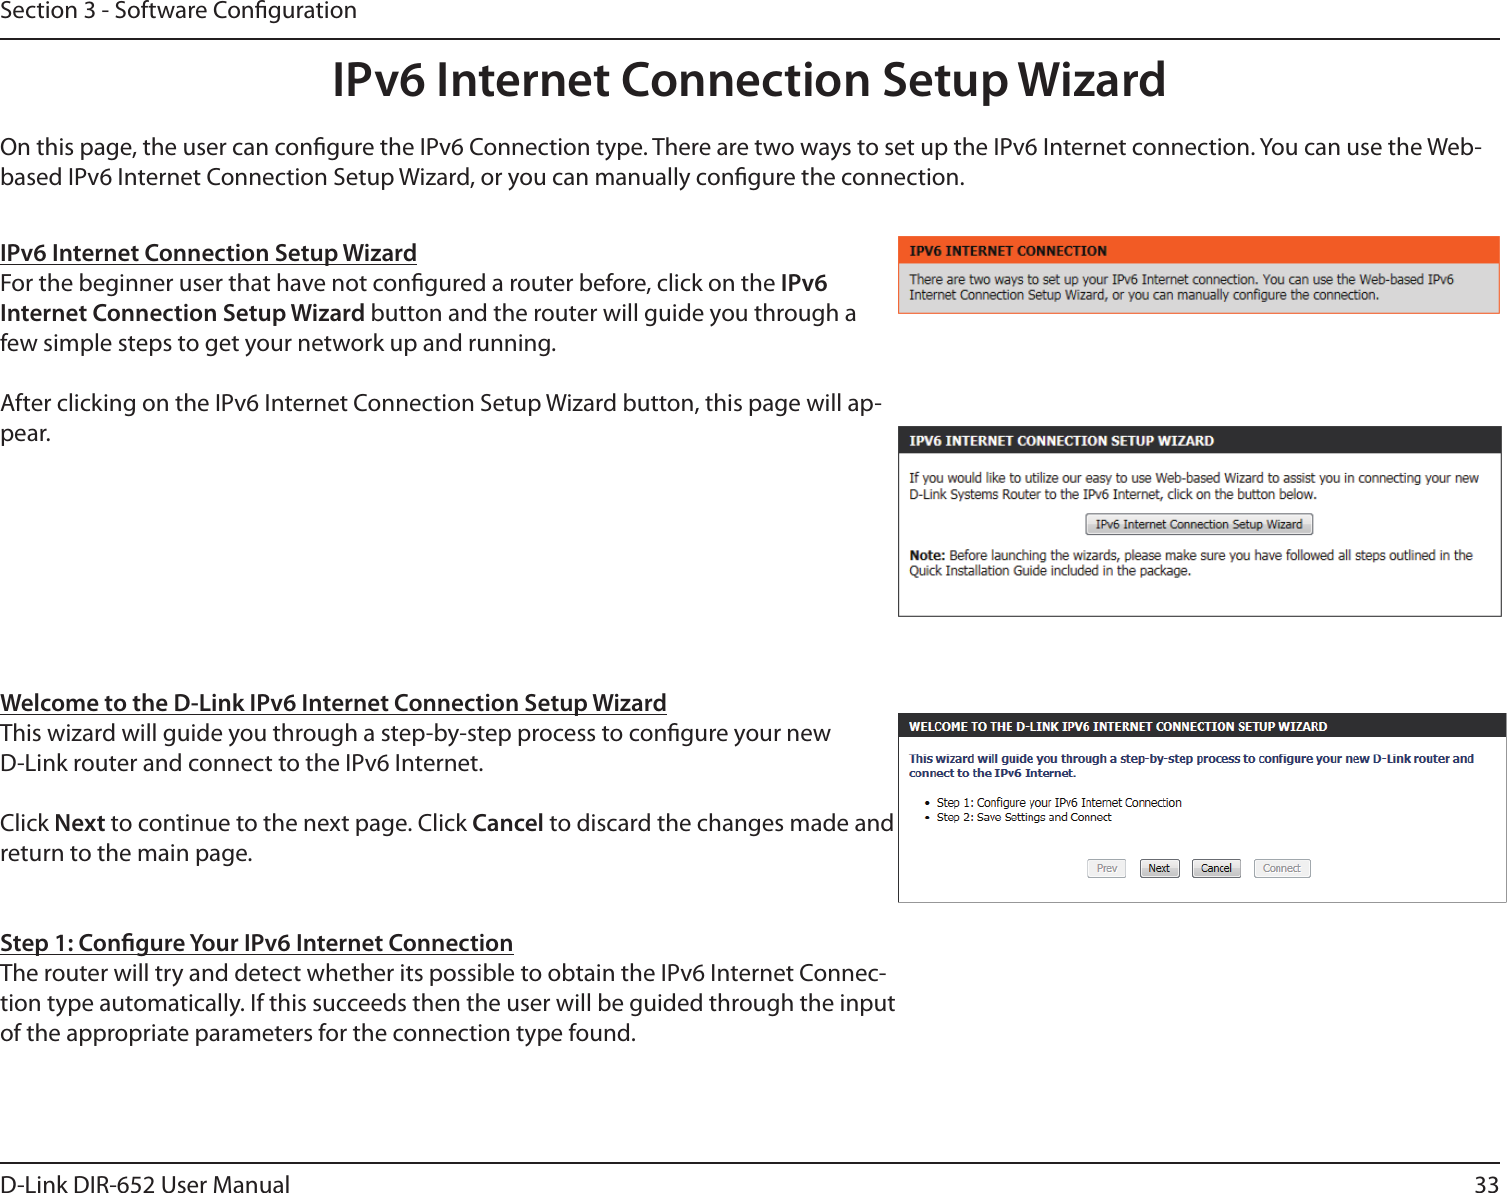 33D-Link DIR-652 User ManualSection 3 - Software CongurationIPv6 Internet Connection Setup WizardOn this page, the user can congure the IPv6 Connection type. There are two ways to set up the IPv6 Internet connection. You can use the Web-based IPv6 Internet Connection Setup Wizard, or you can manually congure the connection.IPv6 Internet Connection Setup WizardFor the beginner user that have not congured a router before, click on the IPv6 Internet Connection Setup Wizard button and the router will guide you through a few simple steps to get your network up and running. After clicking on the IPv6 Internet Connection Setup Wizard button, this page will ap-pear.Welcome to the D-Link IPv6 Internet Connection Setup WizardThis wizard will guide you through a step-by-step process to congure your new D-Link router and connect to the IPv6 Internet.Click Next to continue to the next page. Click Cancel to discard the changes made and return to the main page.Step 1: Congure Your IPv6 Internet ConnectionThe router will try and detect whether its possible to obtain the IPv6 Internet Connec-tion type automatically. If this succeeds then the user will be guided through the input of the appropriate parameters for the connection type found.